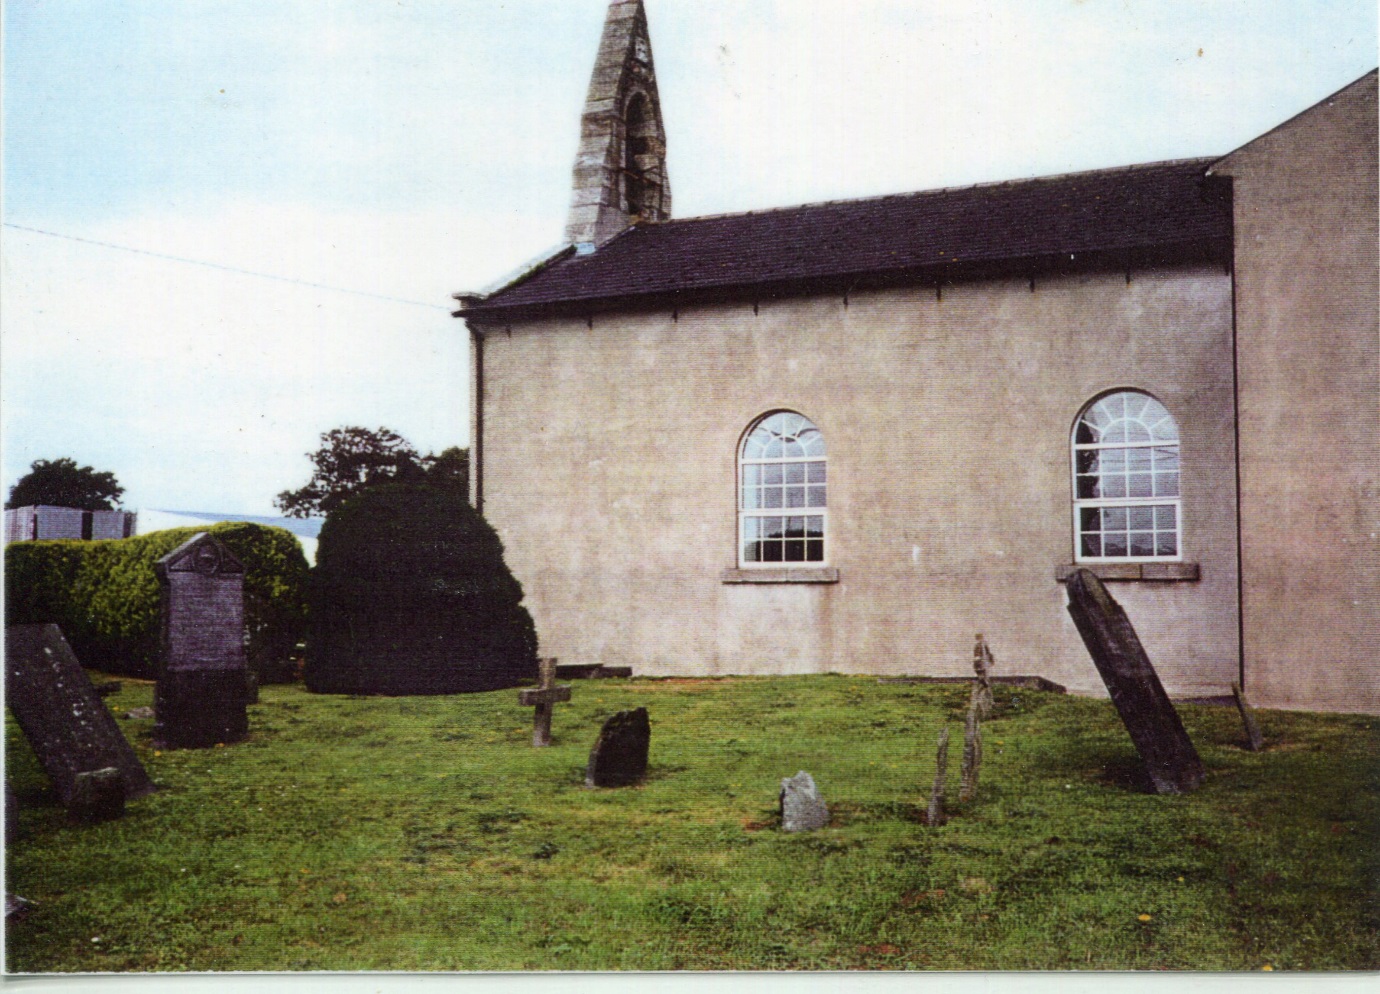 C:\Users\Virginia Rundle\Pictures\Cranwill\St Mogues Church Ballycanew courtesy of Margaret Greenwood.jpg